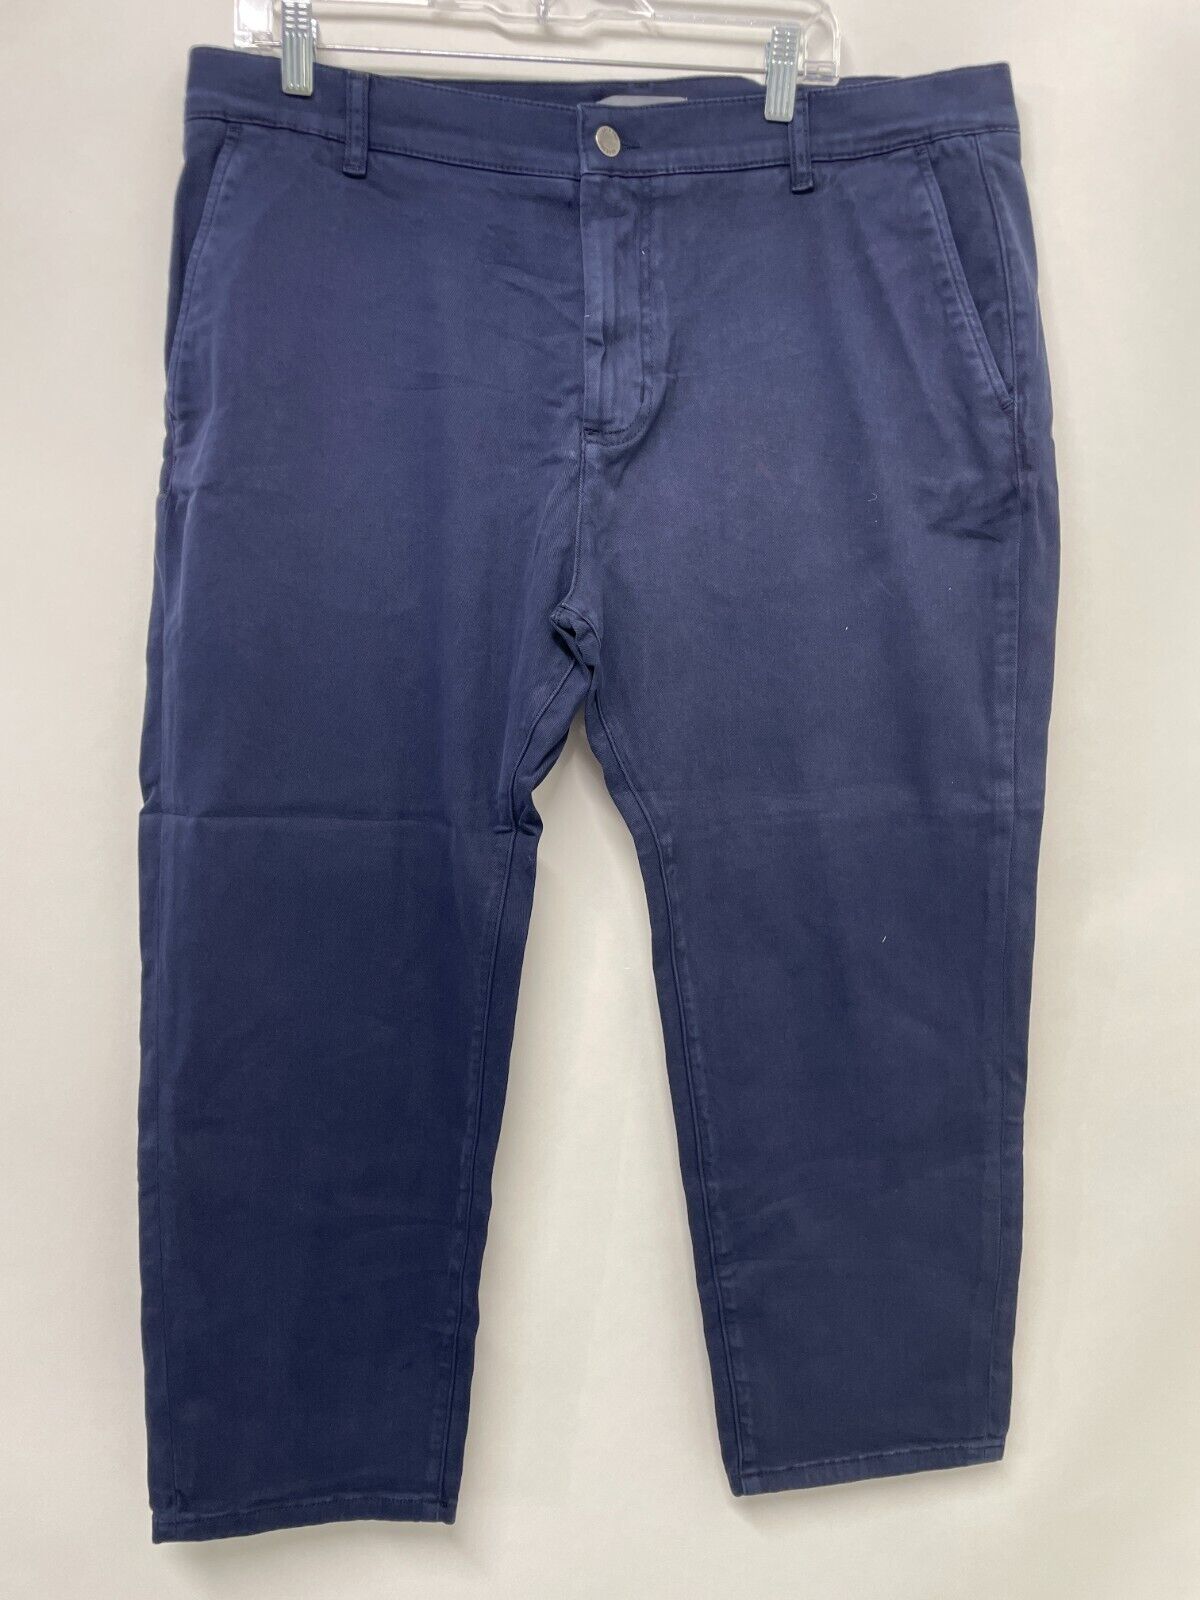 Ash & Erie Men's 38 x 25 Washed Stretch Chino Pant Navy Casual Slim Fit NWT